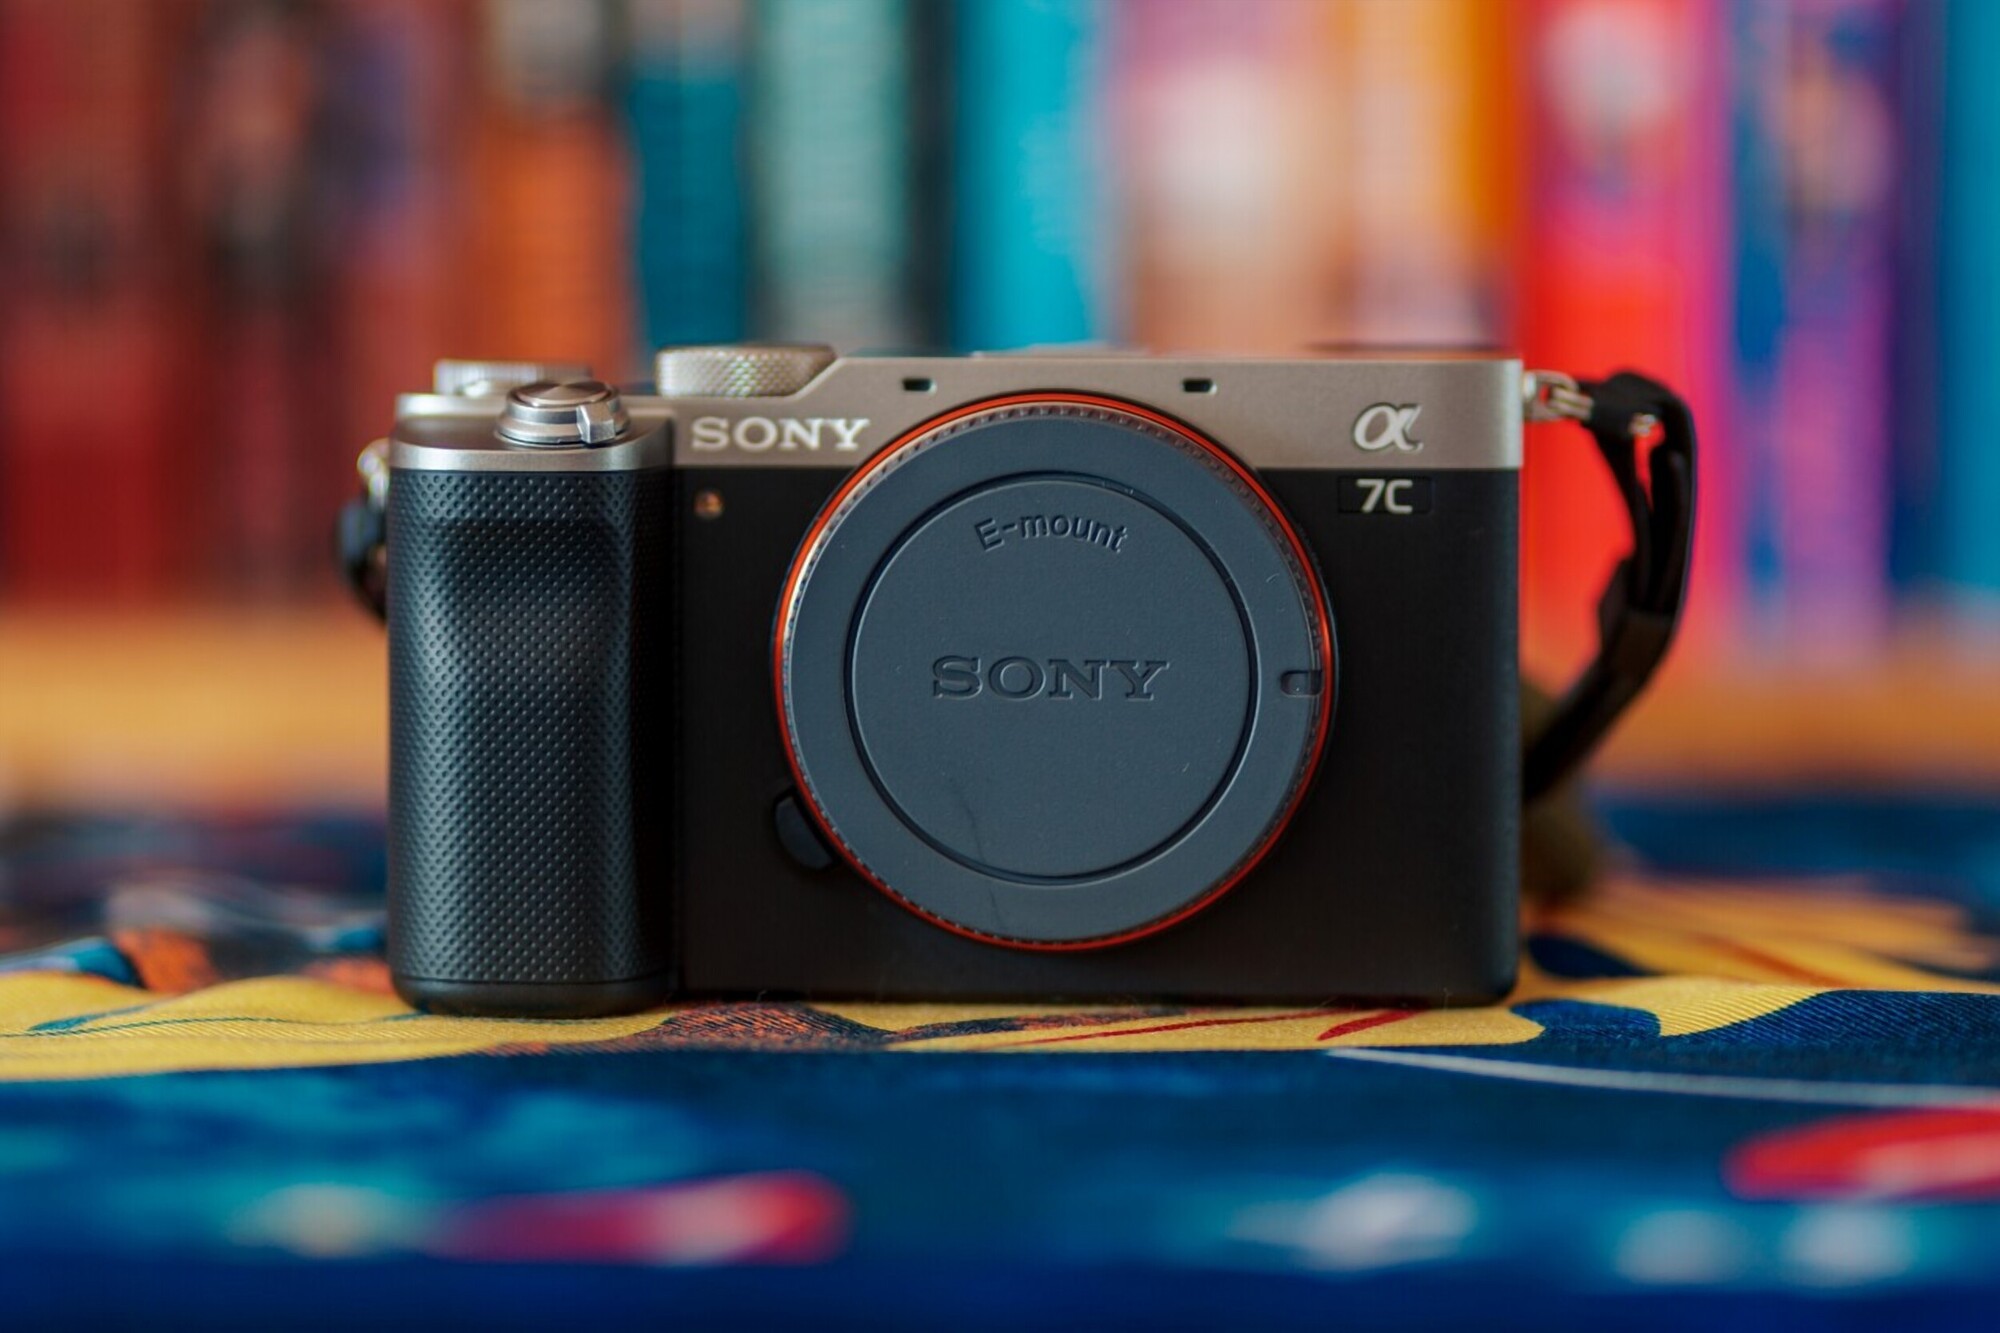 Sony Alpha a7C Reviews, Pros and Cons